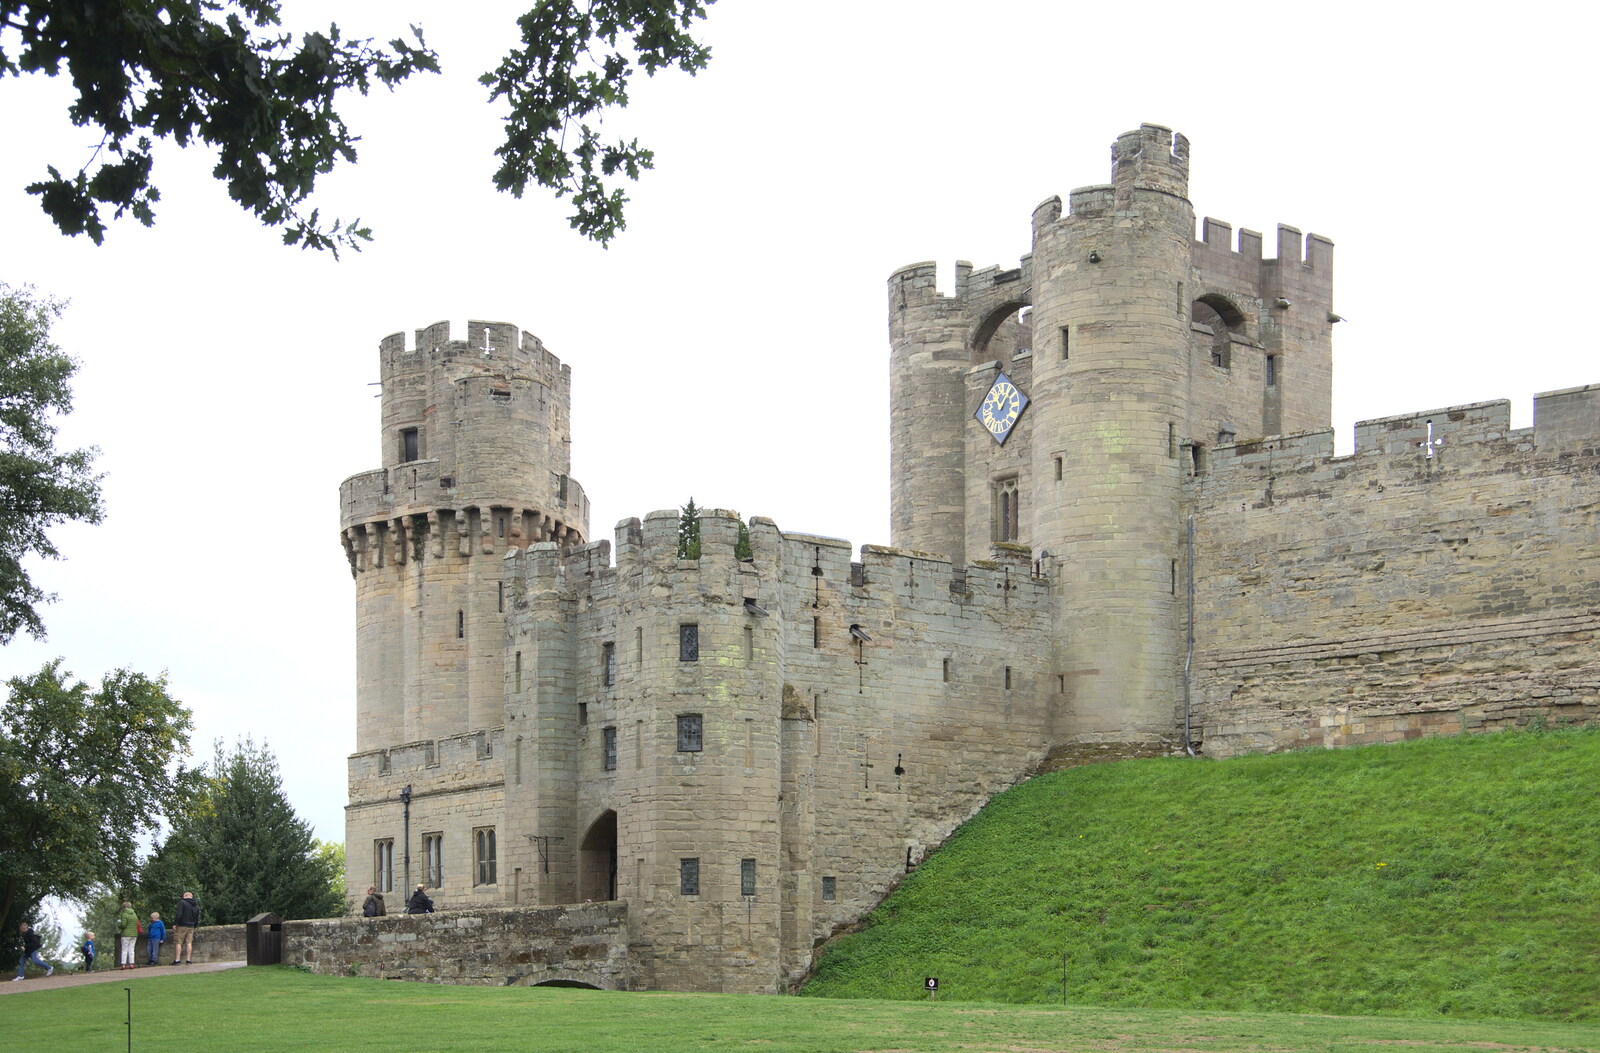 Warwick Castle from A Day at Warwick Castle, Warwickshire - 8th September 2018